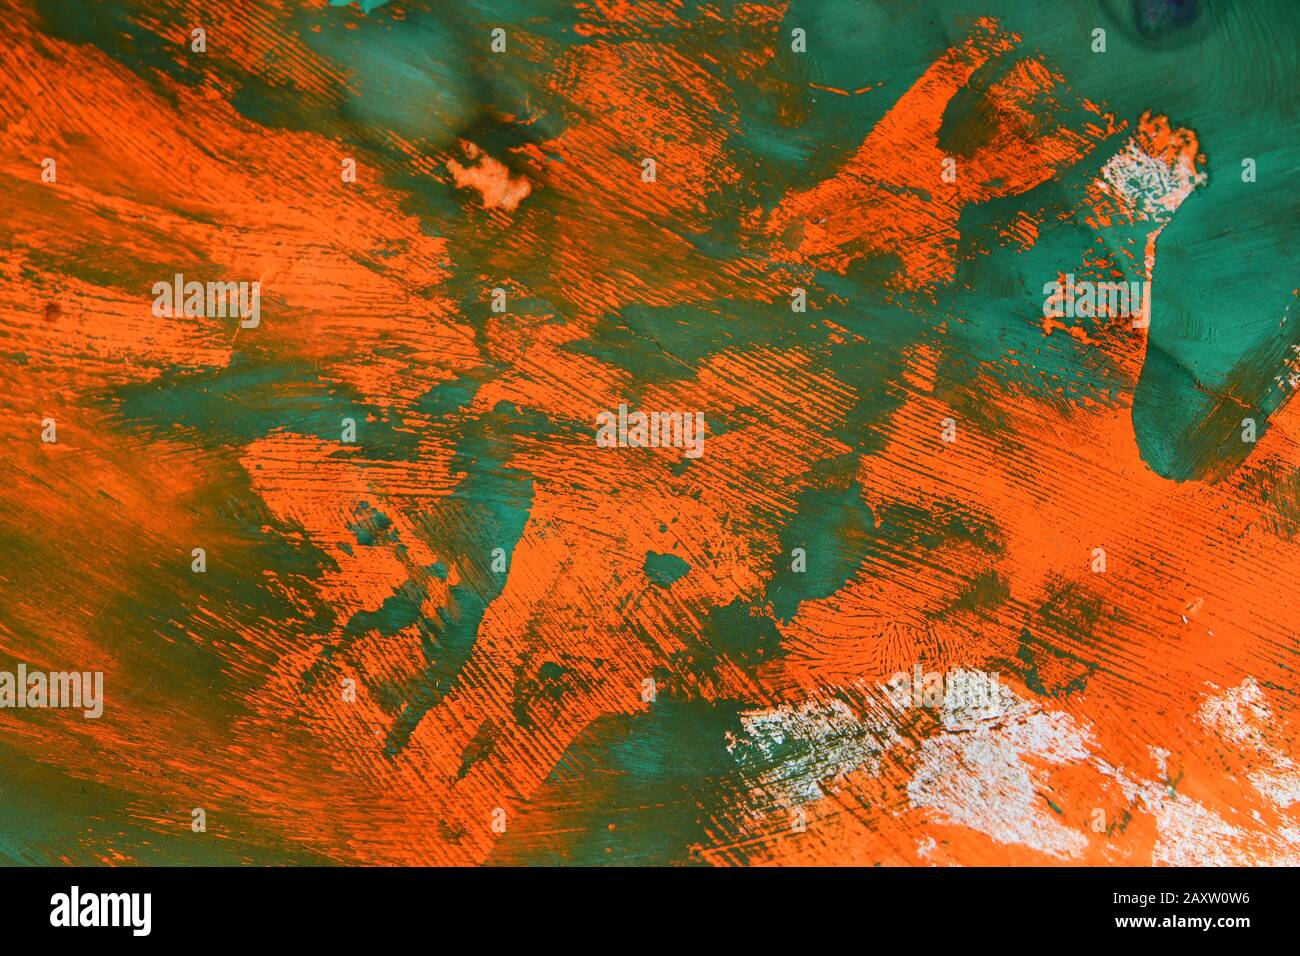 Abstract background of smears of green over orange paint Stock Photo